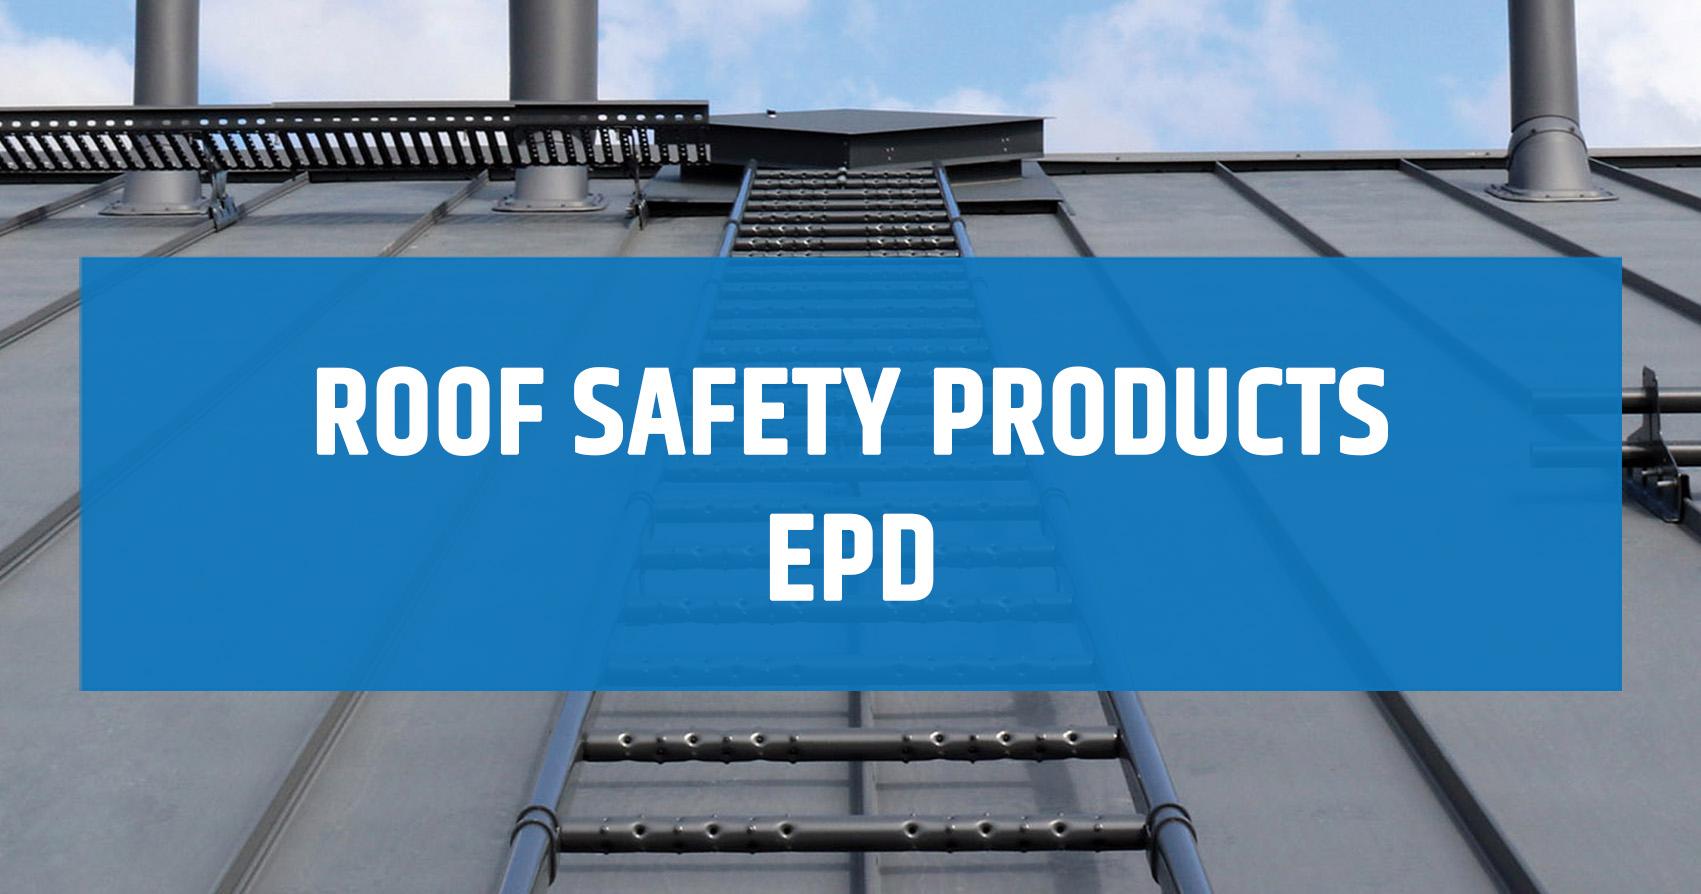 Roof safety products EPD